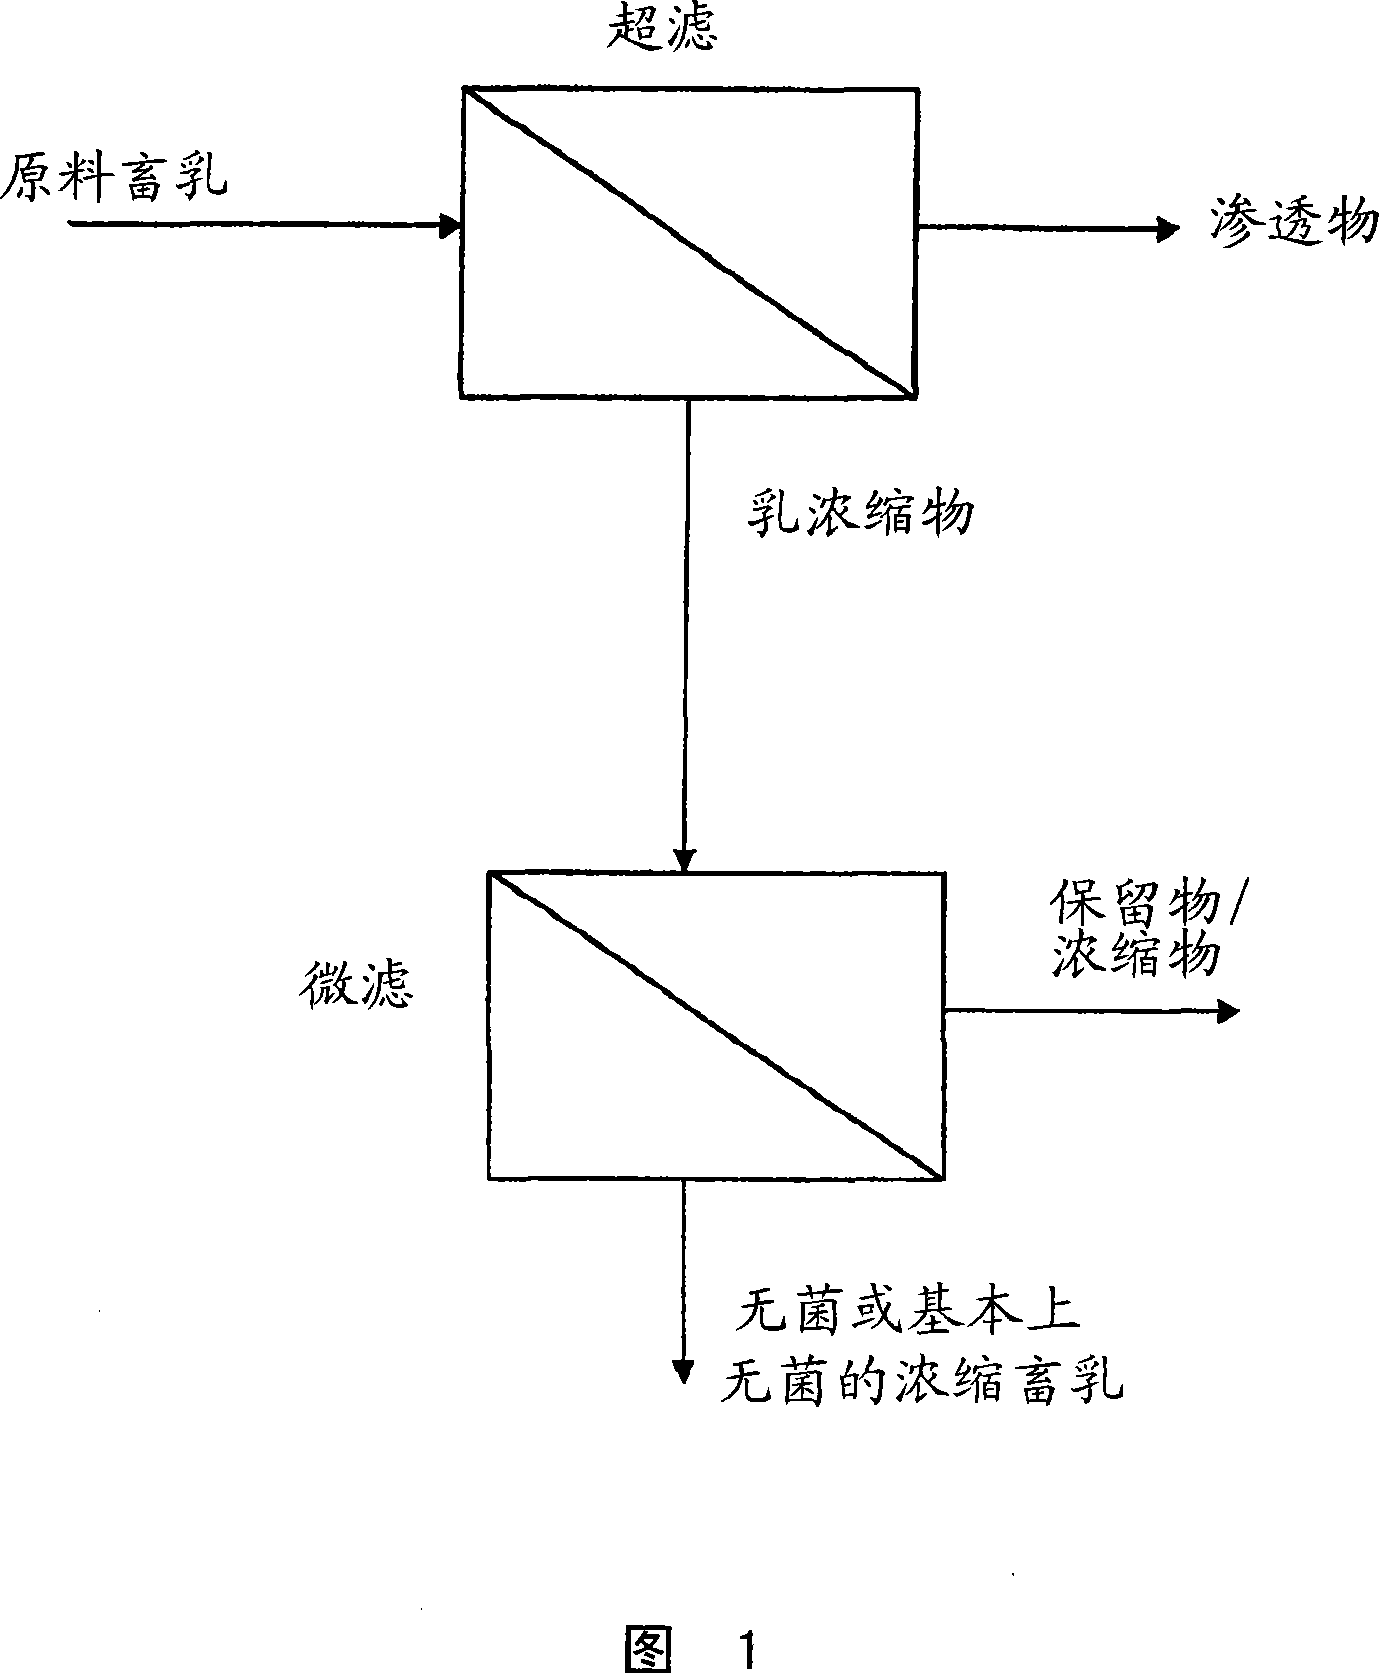 Method of producing concentrated liquid dairy products